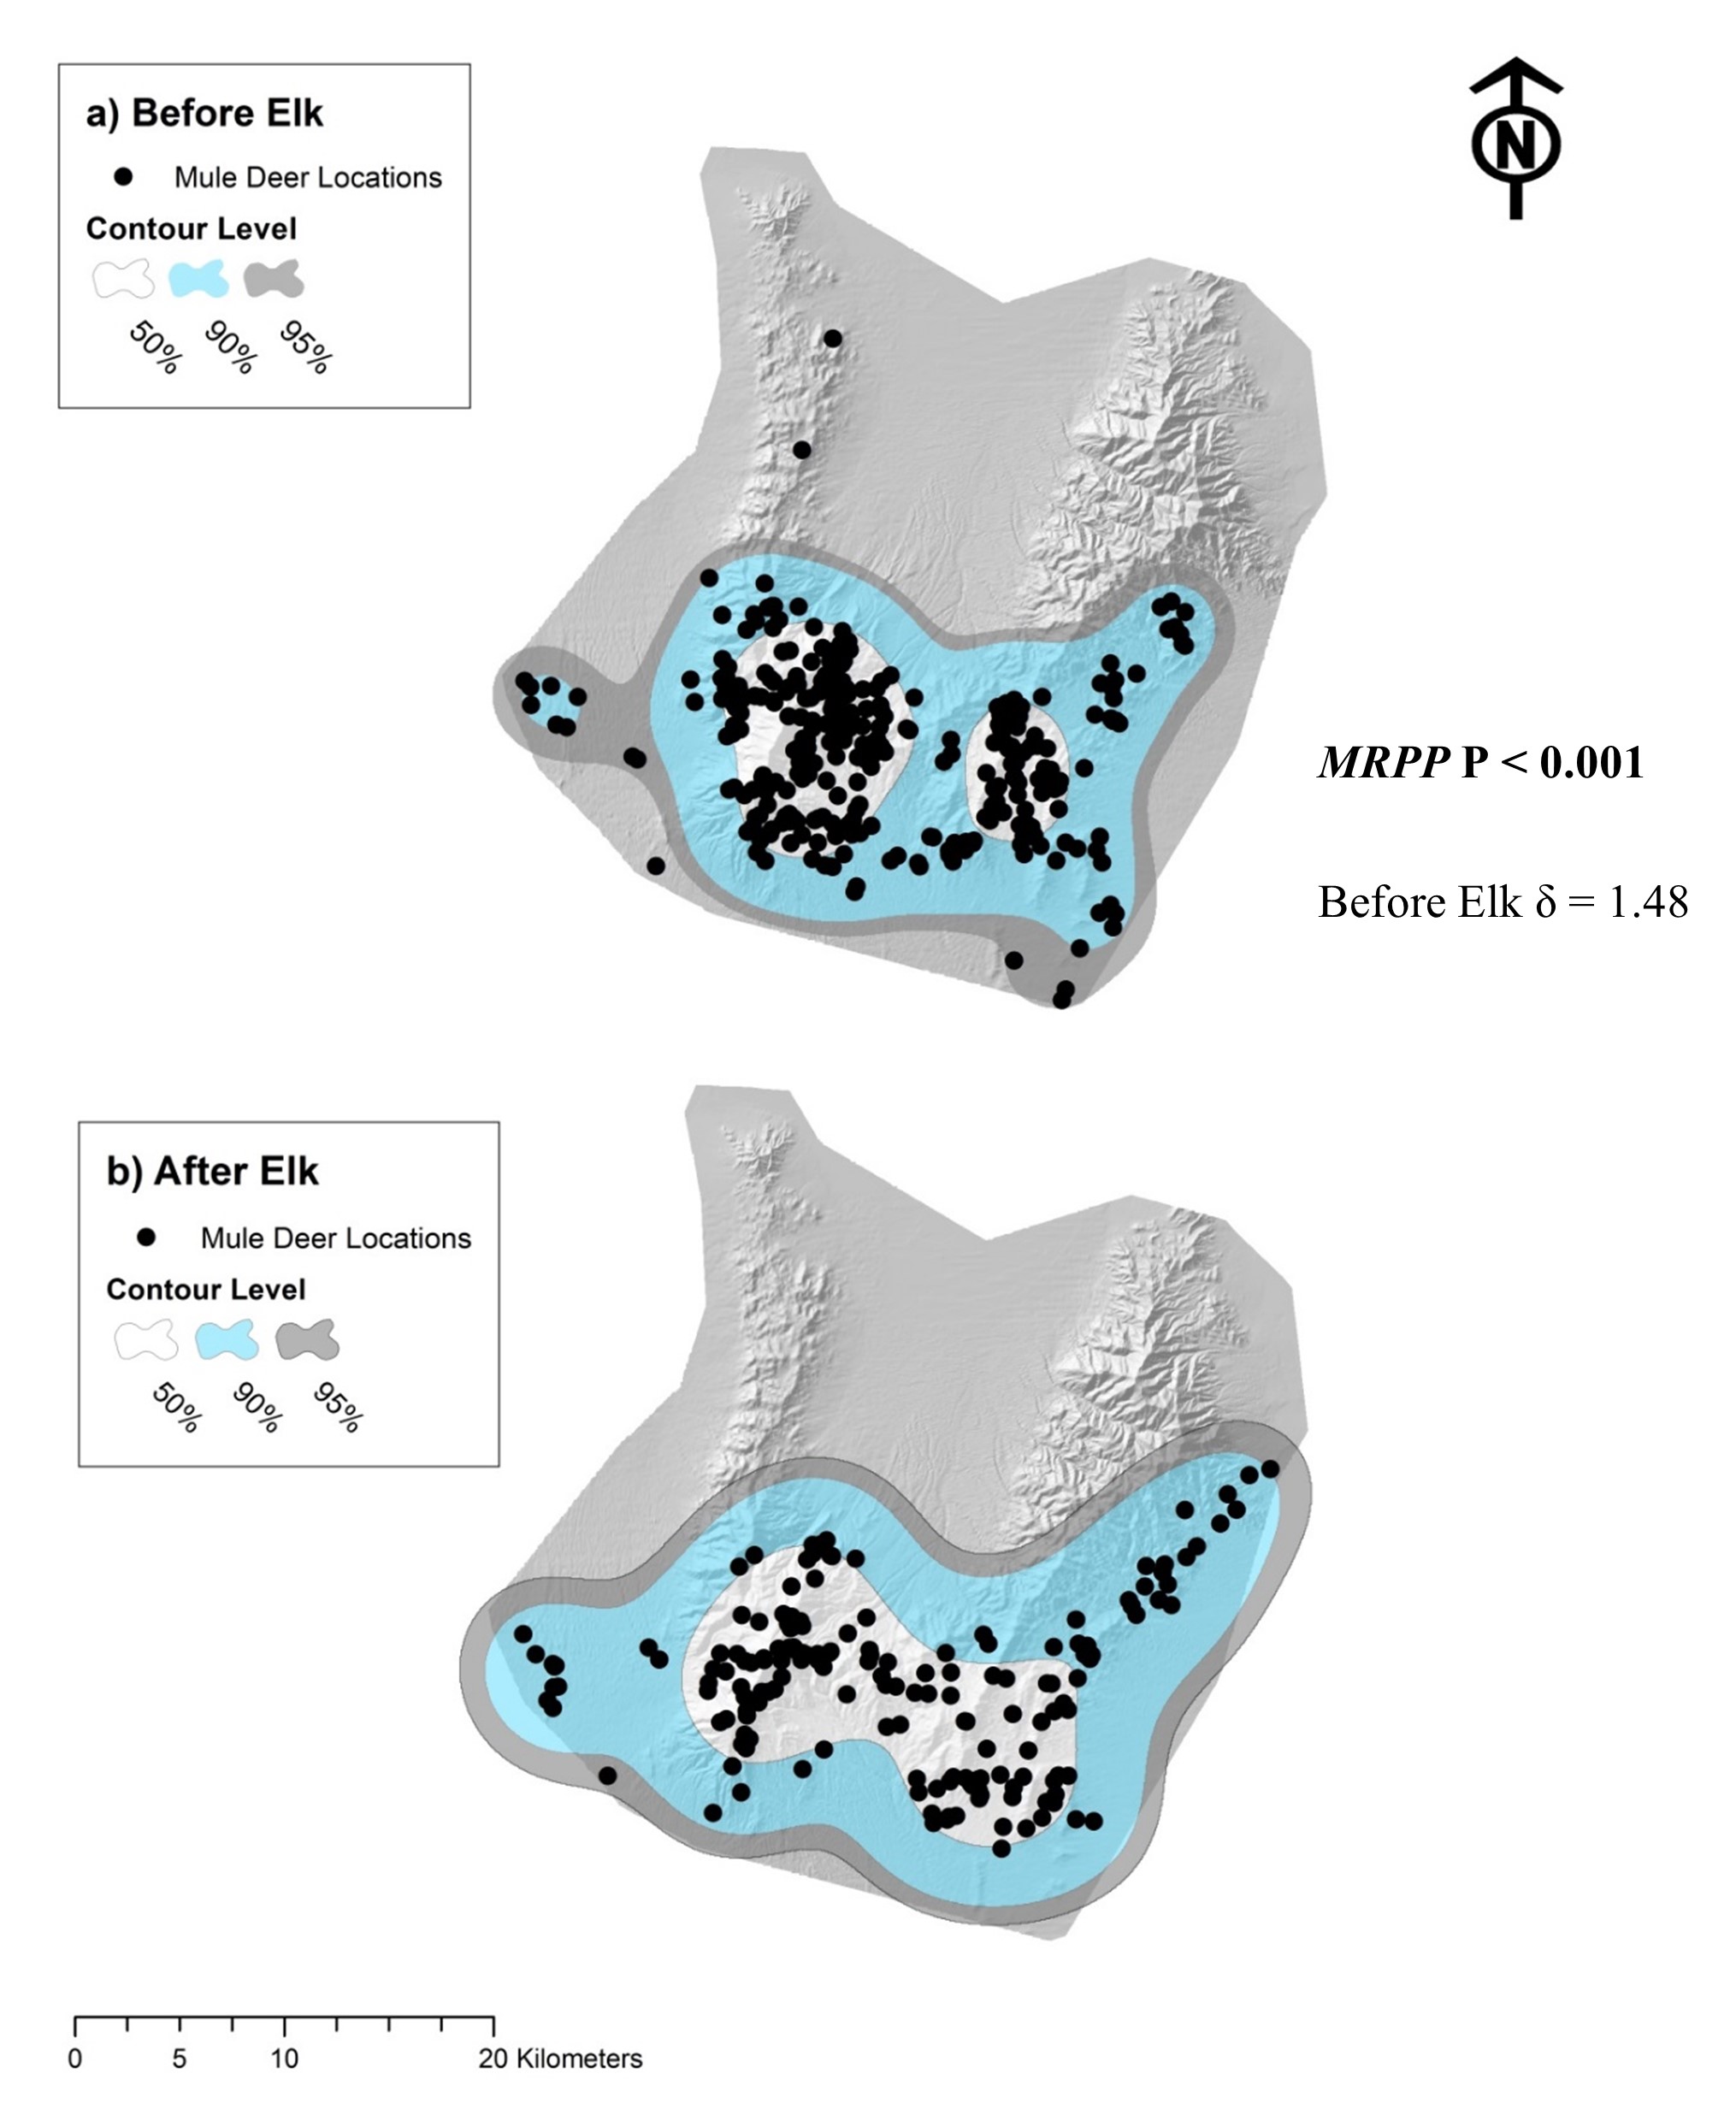 Percent contour levels from kernel density estimates (KDE) based on mule deer locations before elk introduction (a) from autumn 1993 to spring 1996 and and after elk introduction (b) from autumn 1998 to spring 2001 in eastern Nevada, USA. Contour levels were calculated from utilization distribution (UD) and represent the 95% (outer range), 90% (inner range), and 50% (core activity range) from 50-m resolution GIS raster of the utilization distribution (UD).